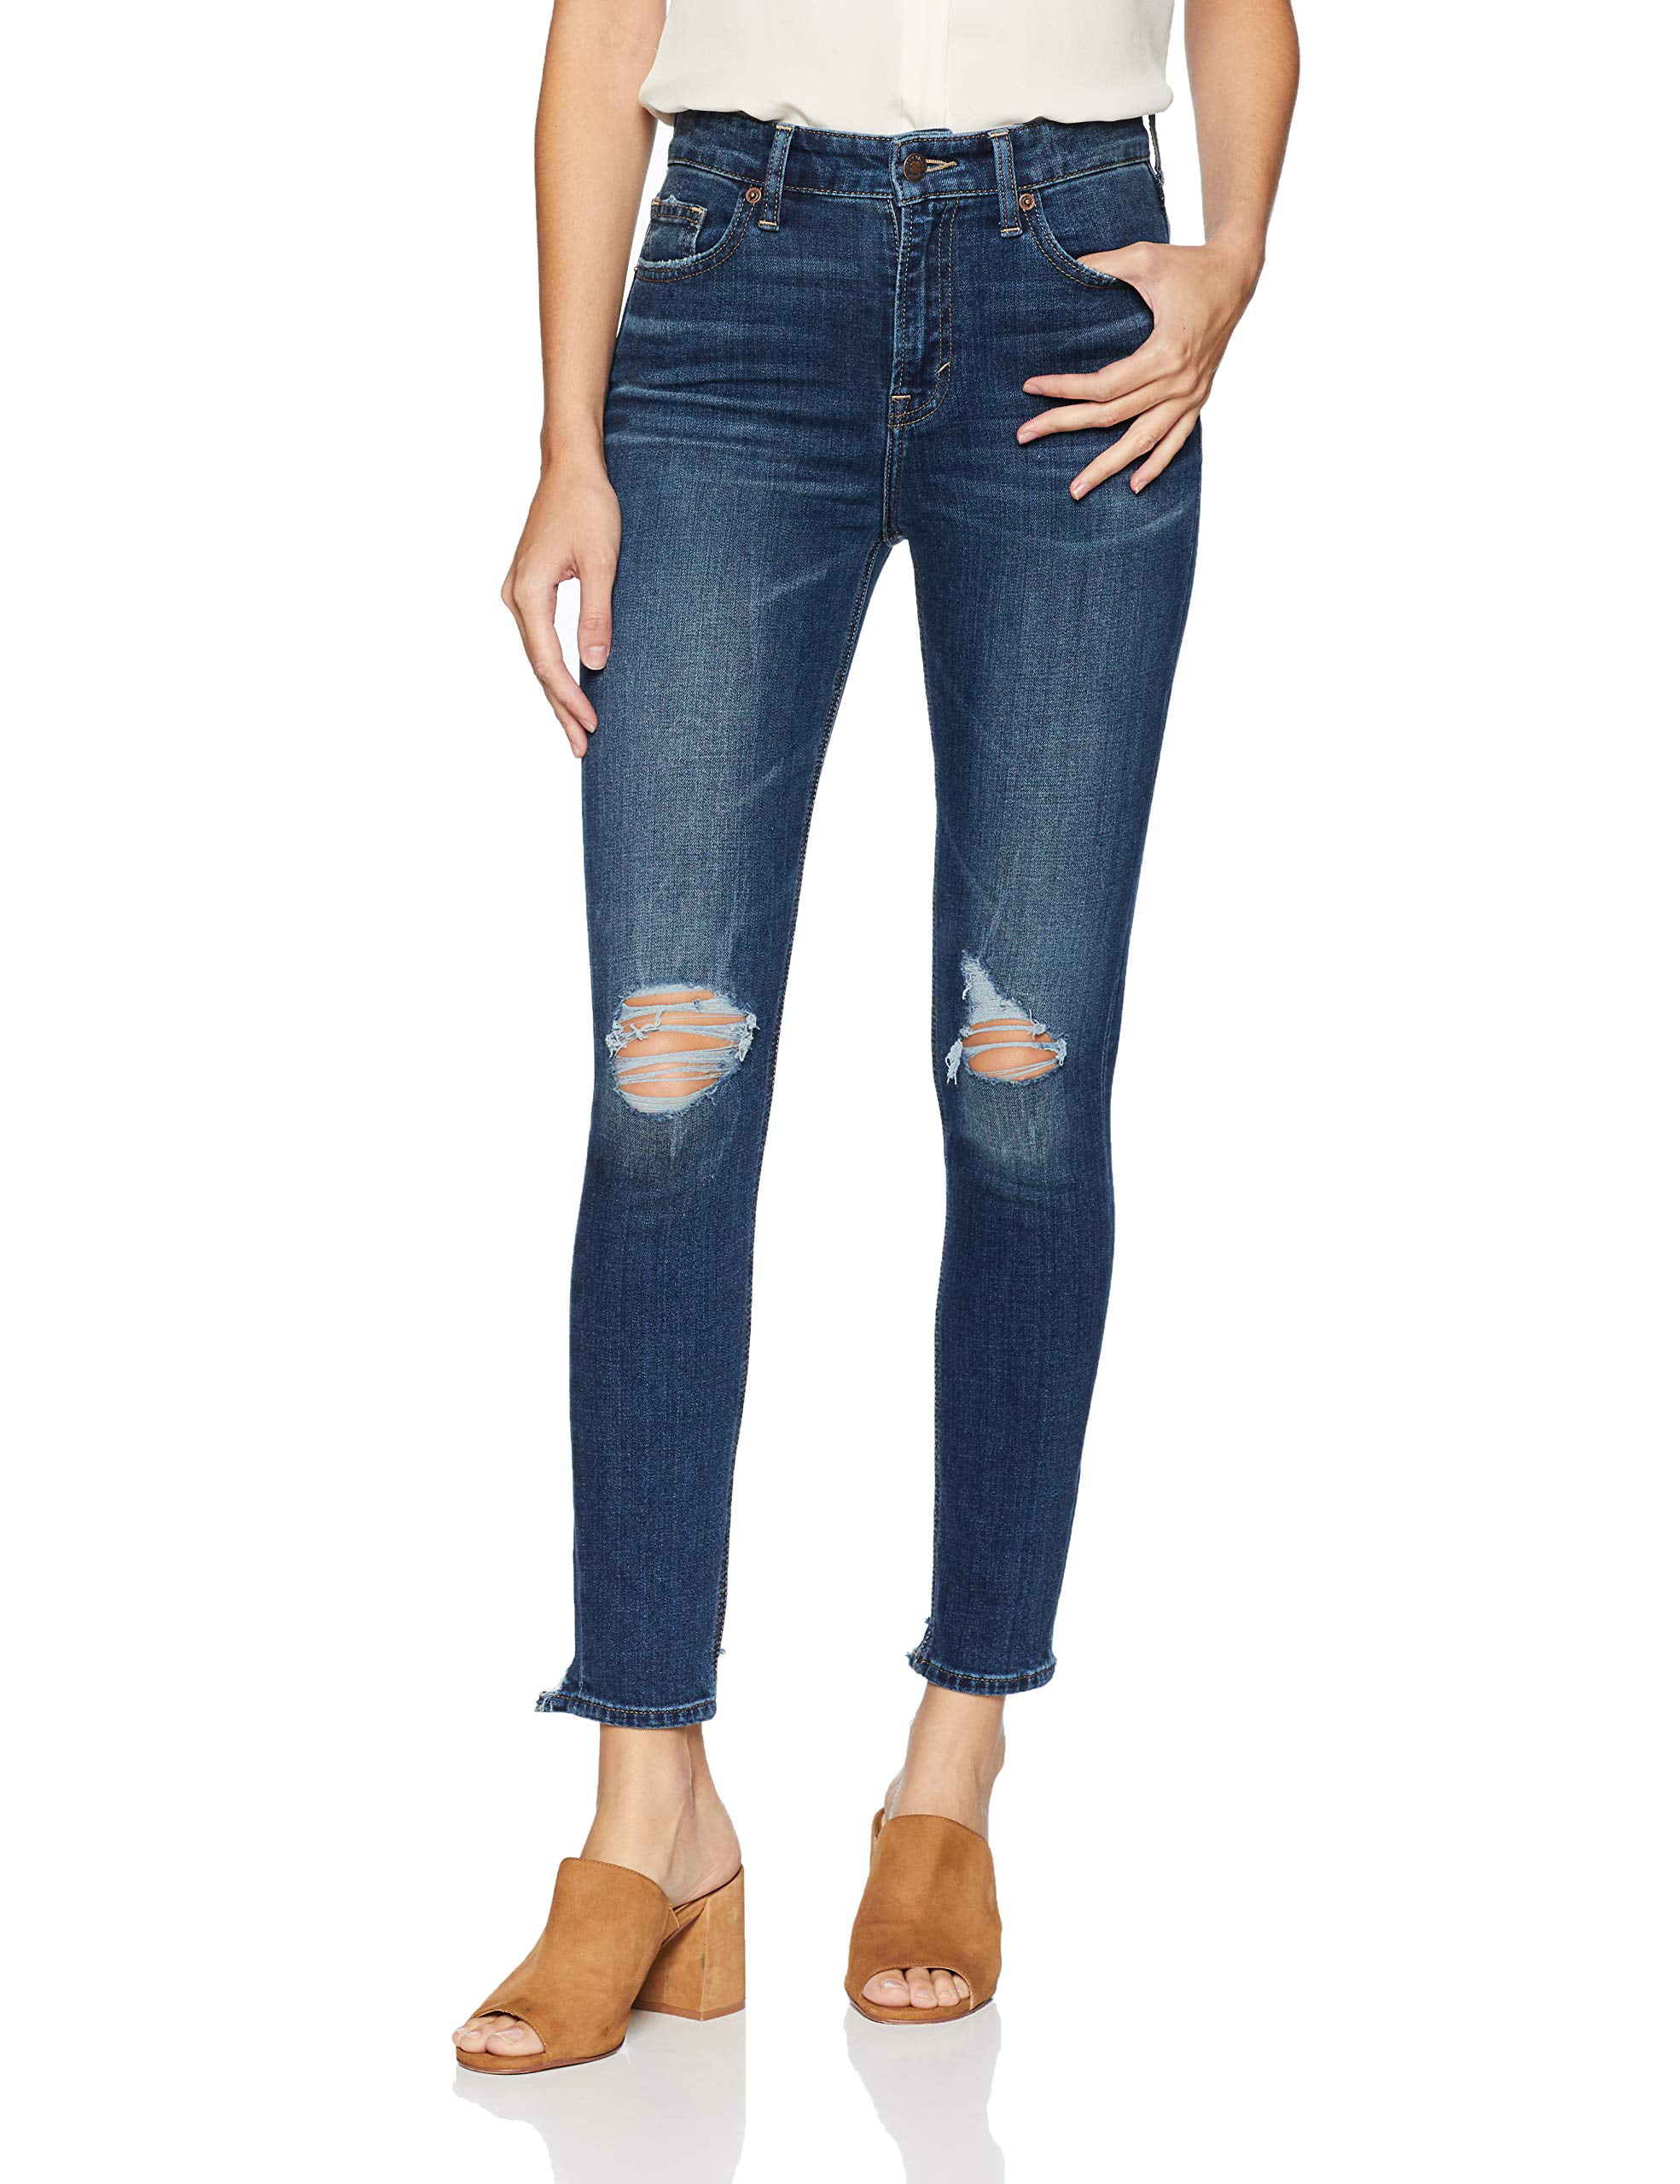 Lucky Brand - Womens Hgh-Rise Stretch Distressed Jeans 27 - Walmart.com ...